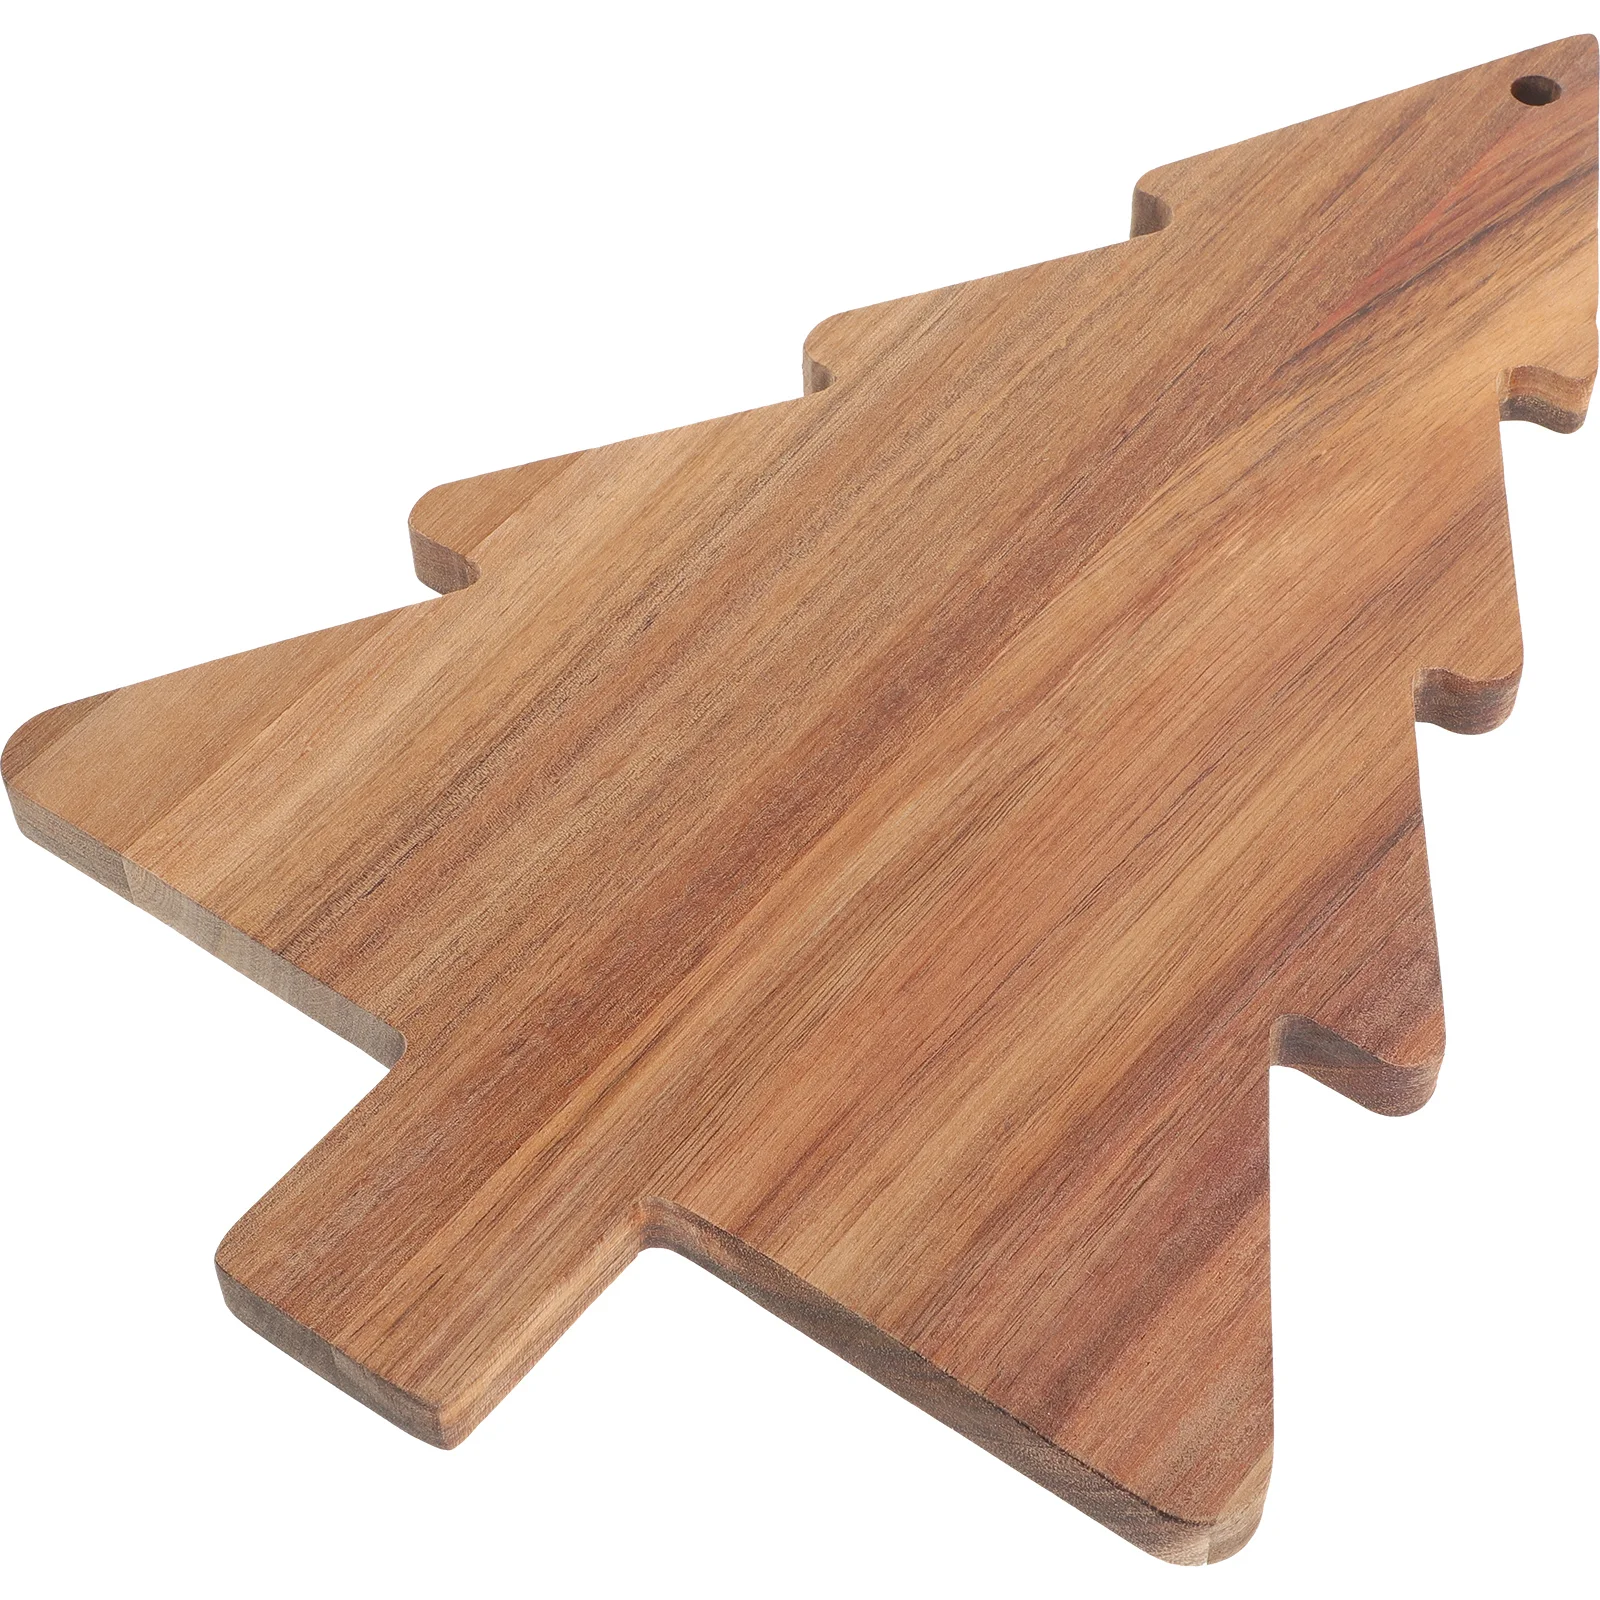 

Christmas Tree Shaped Dish Snack Trays Bread Candy Dry Fruit Plate Food Serving Board Cheese Cutting Board Dishes for table